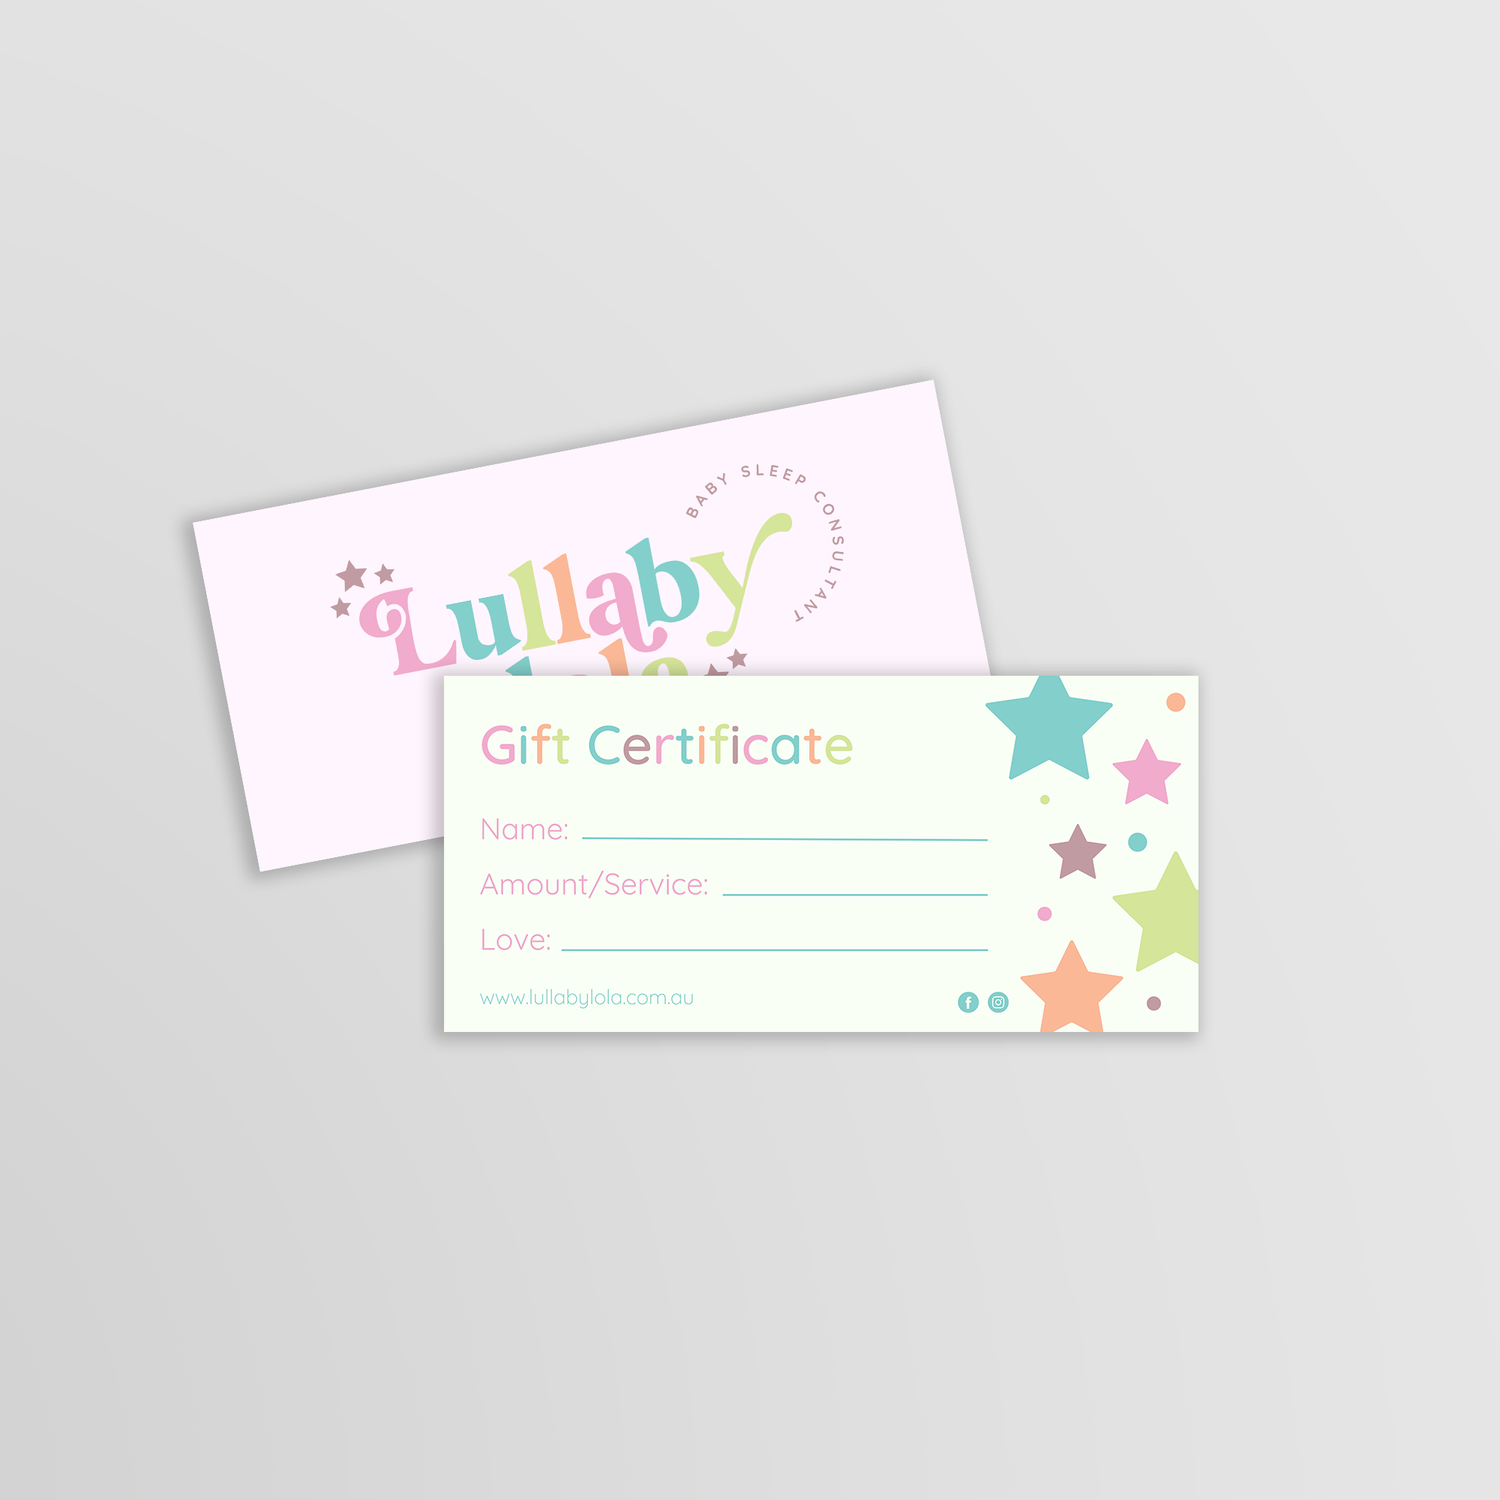 We also offer gift cards and gift certificates for sleep guides and consultations which are the best baby shower gift, mothers day gift, or surprise for a new mum who is experiencing sleep challenges. Can be used for in home, online or email consultations